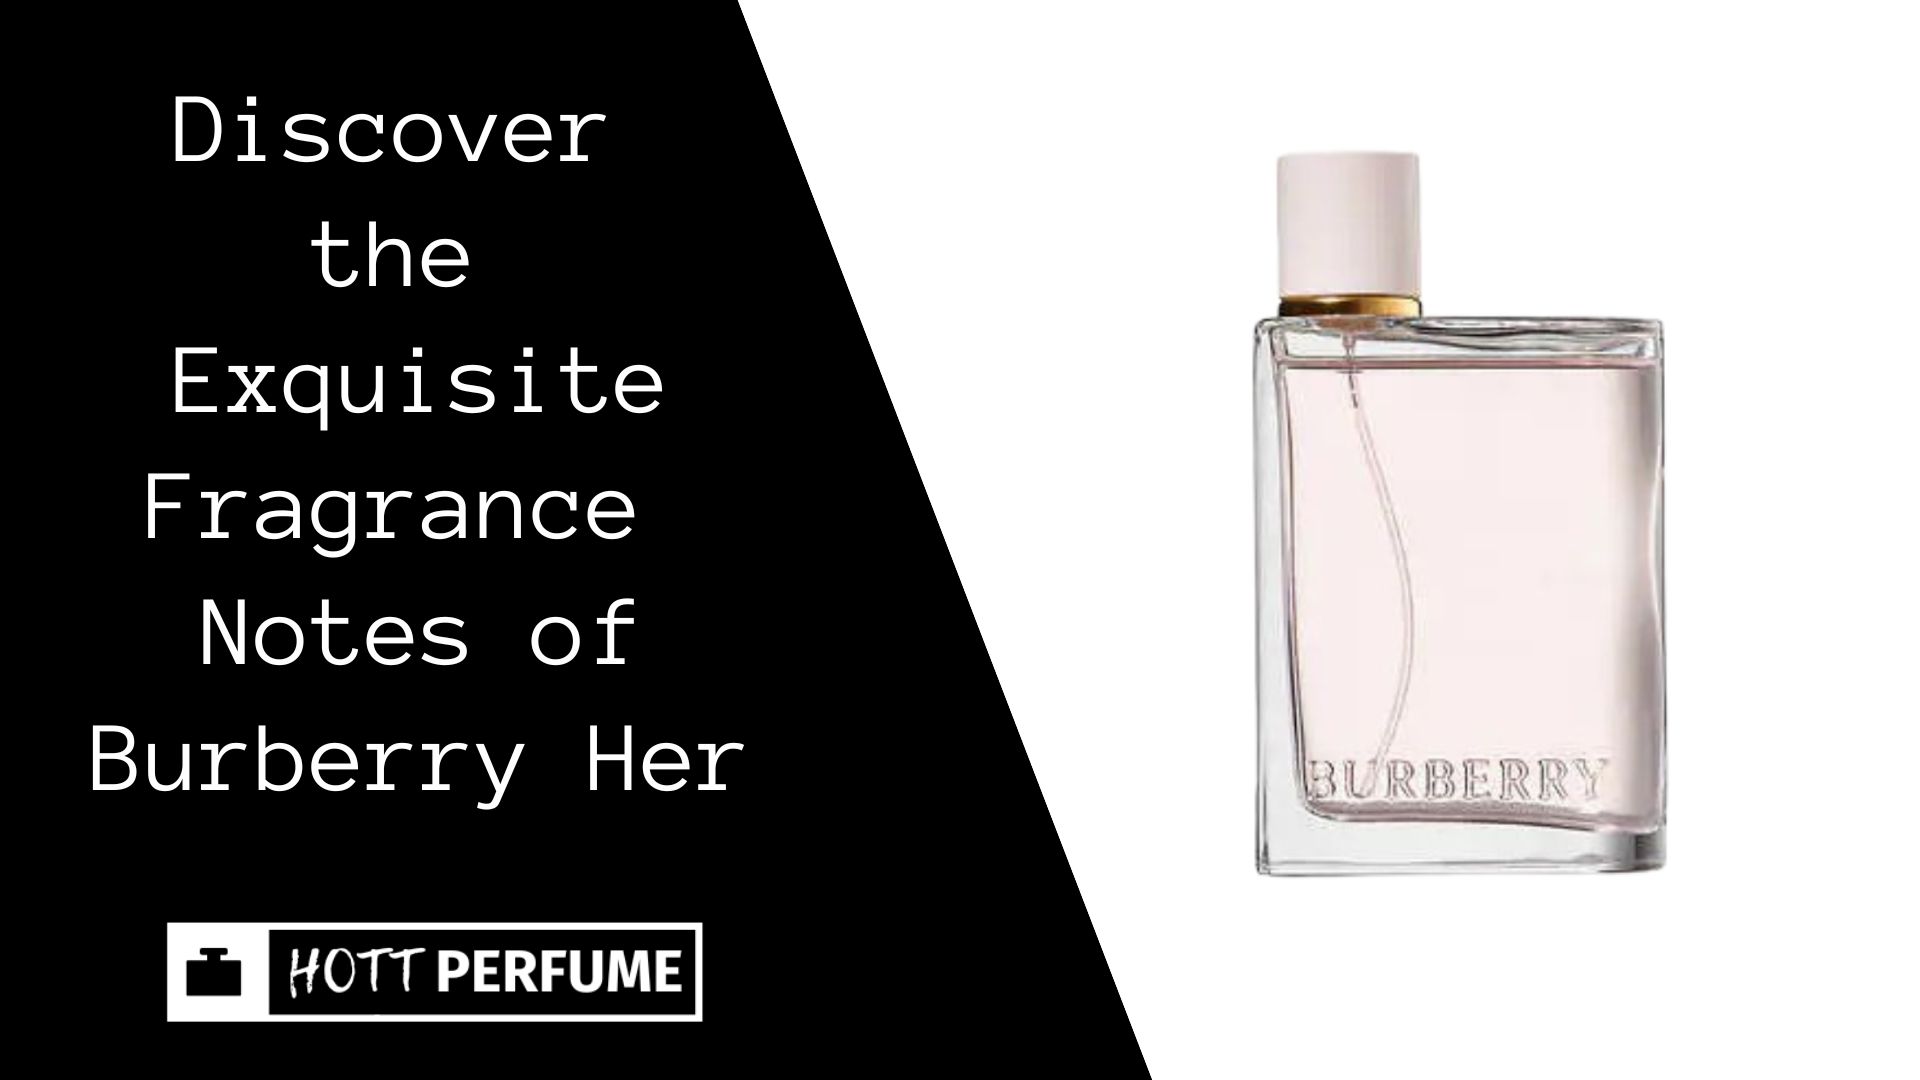 Discover the Exquisite Fragrance Notes of Burberry Her